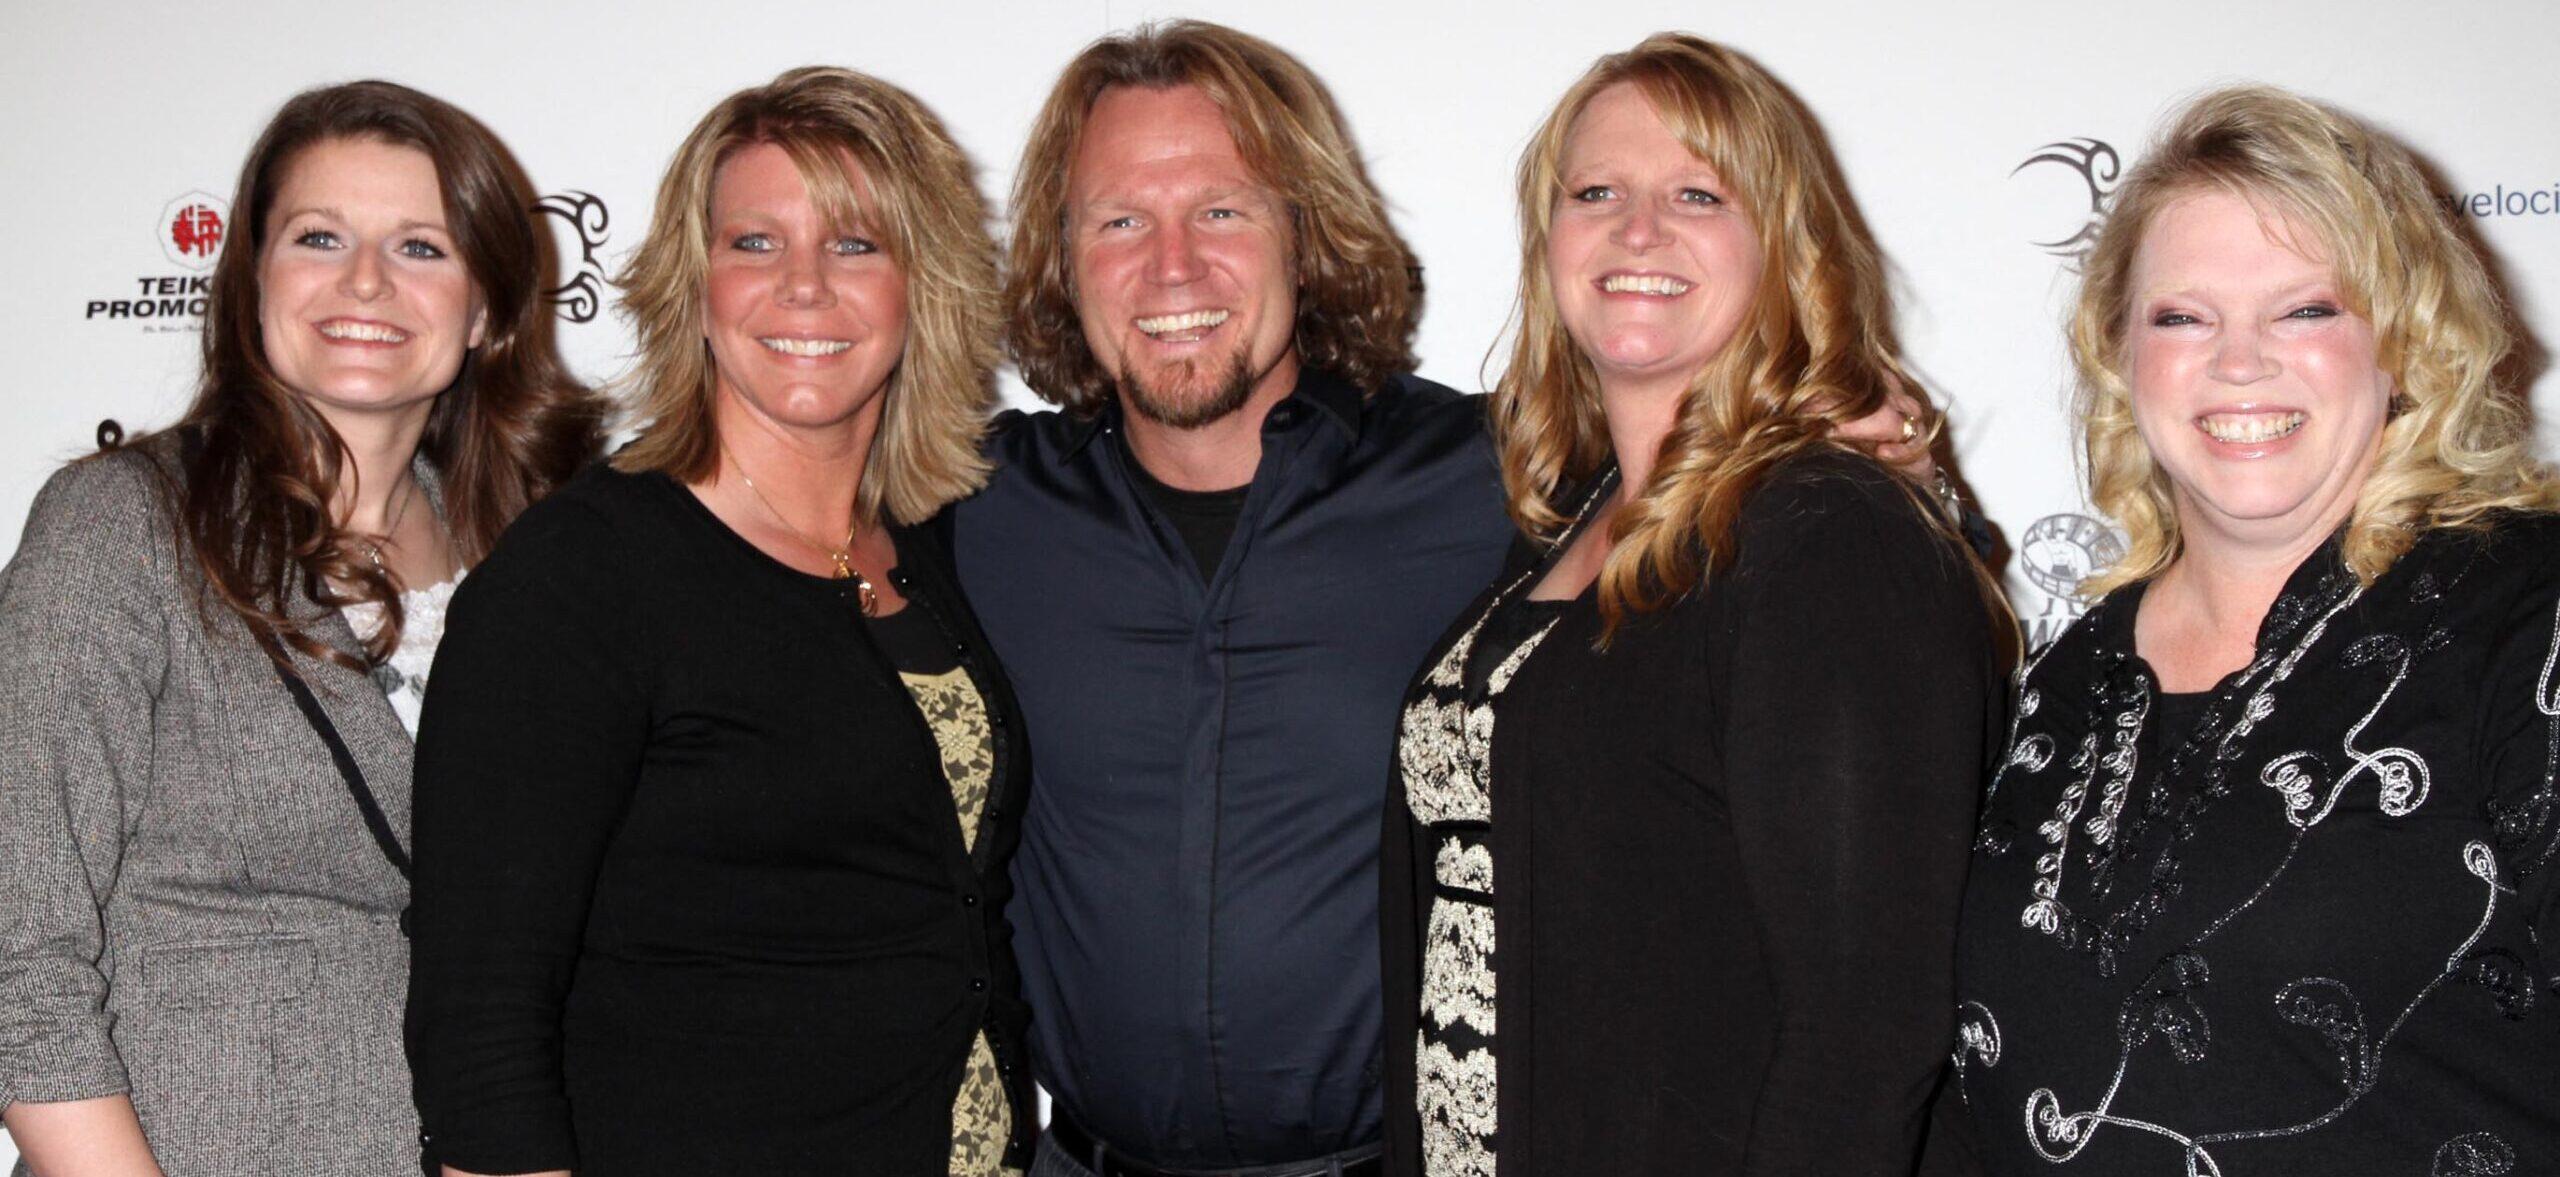 ‘Sister Wives’ Kody Brown Wants A ‘Future Of Forgiving & Understanding’ With Ex-wives